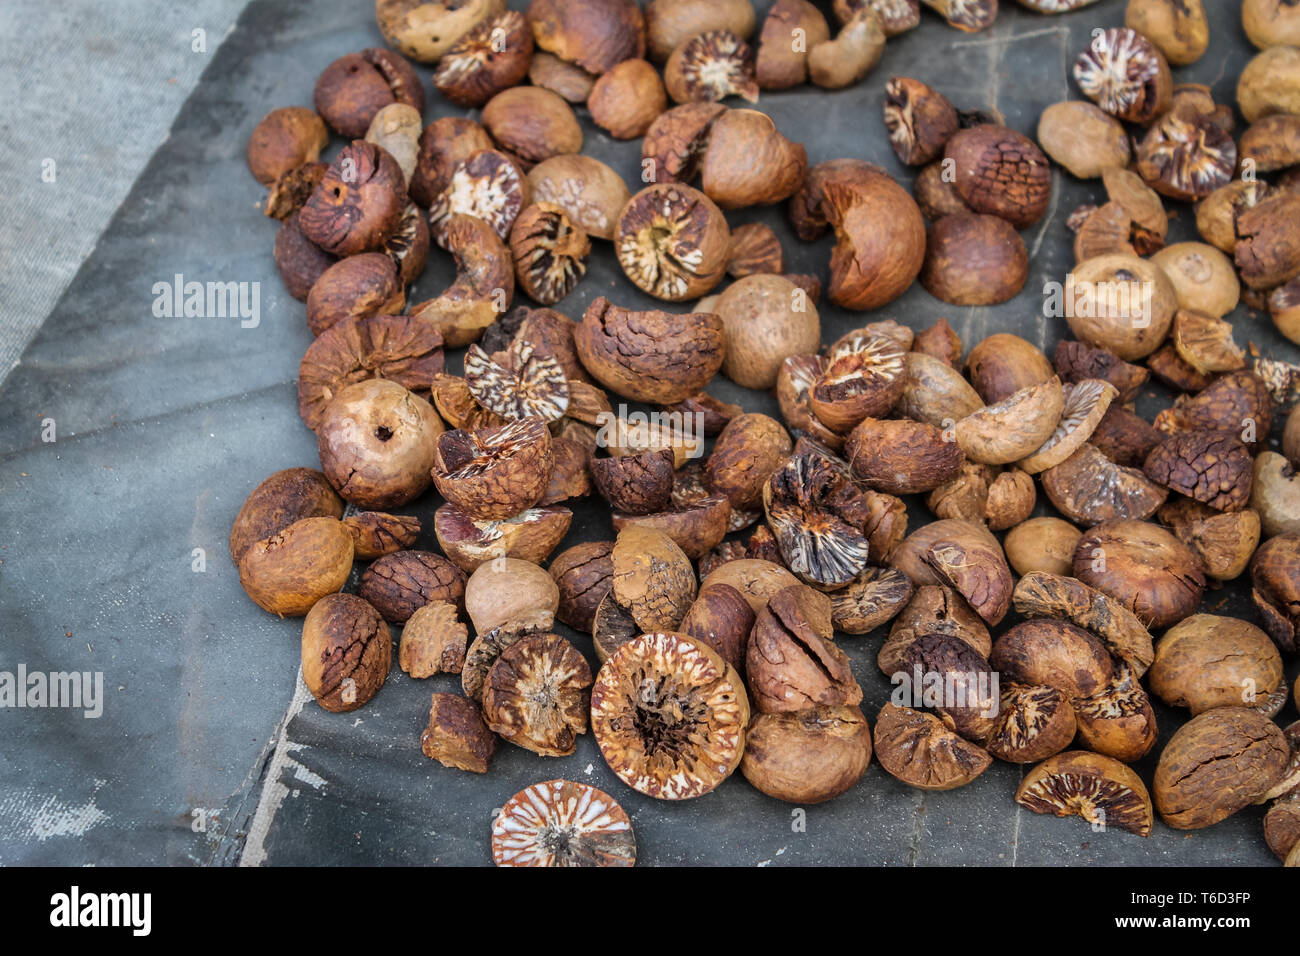 Areca Nuts also known as Betel Nuts laid out to dry on a Street in Mandalay, Myanmar. Stock Photo